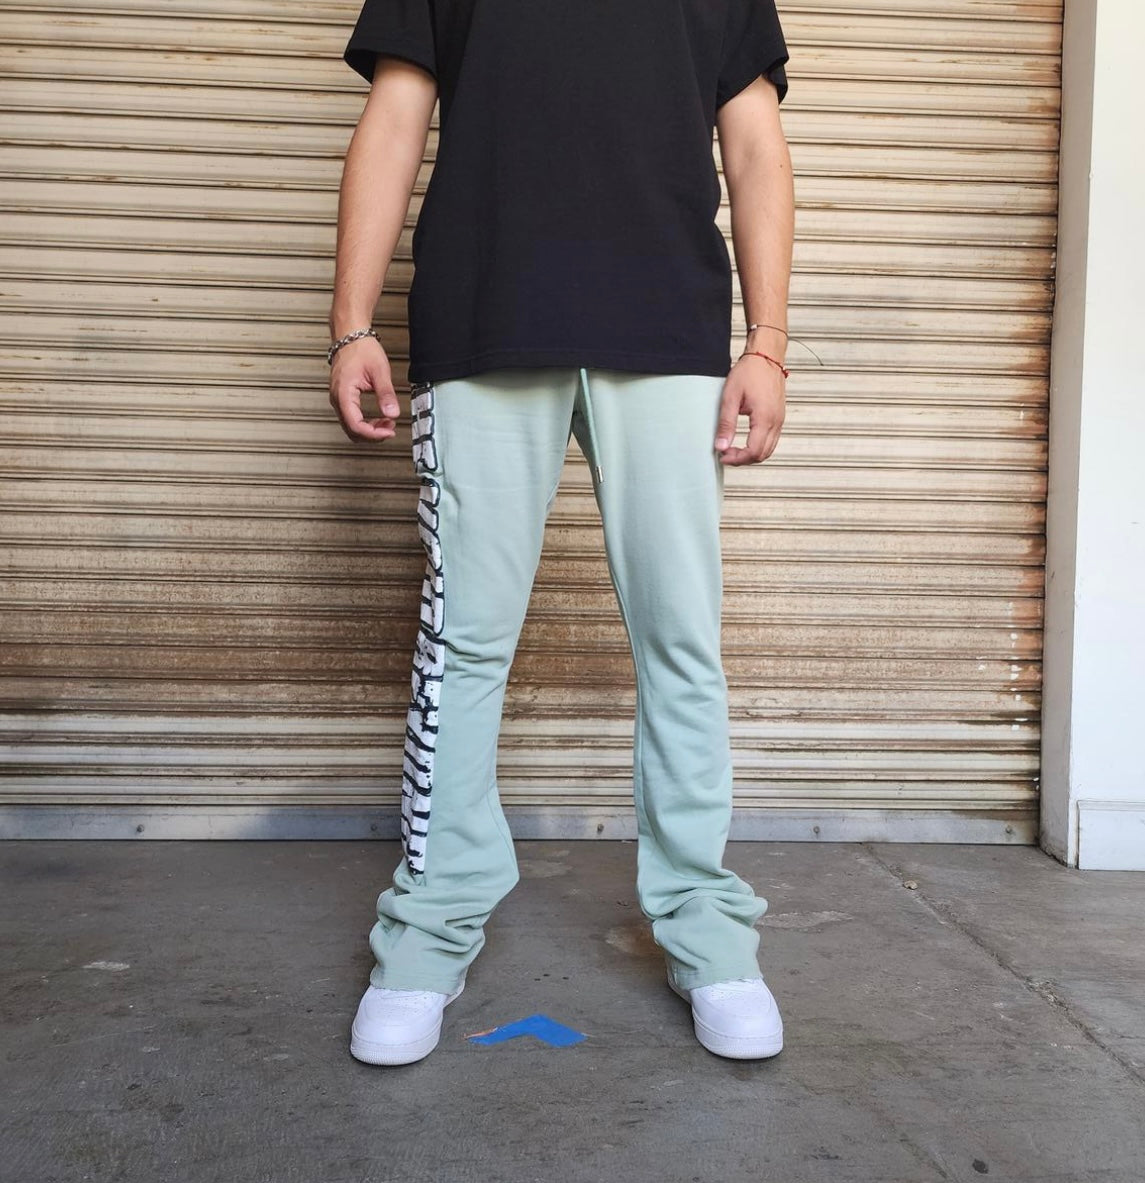 6TH BRAND INVADER" STACKED PANTS